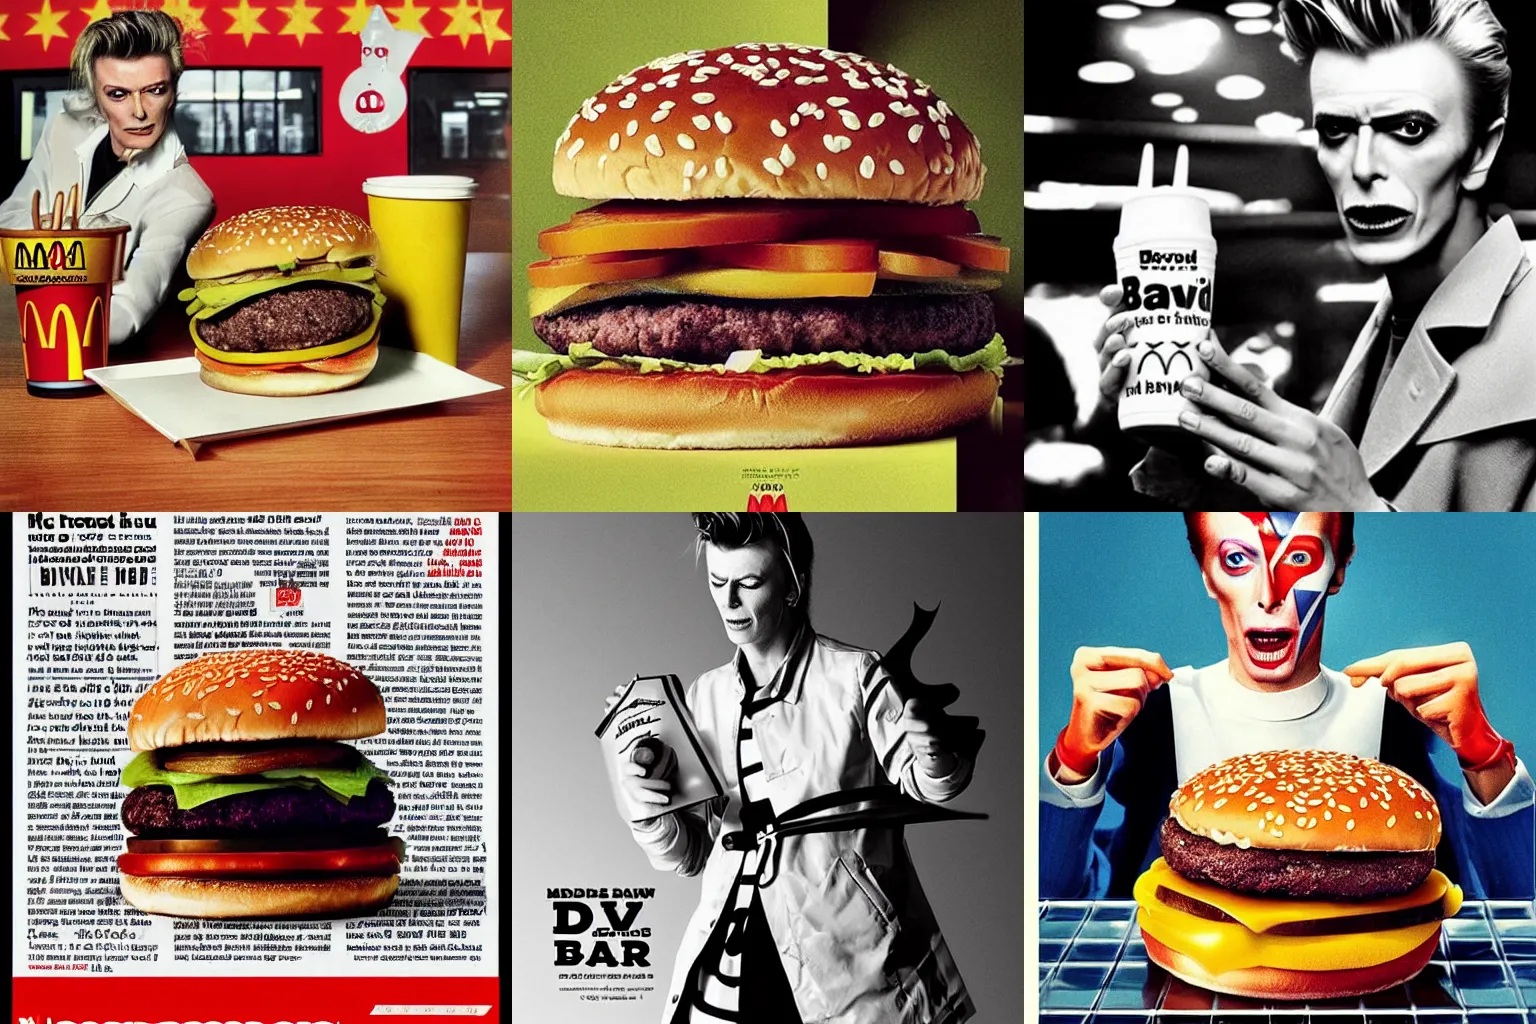 Prompt: “McDonald’s ad for the David Bowie Burger”